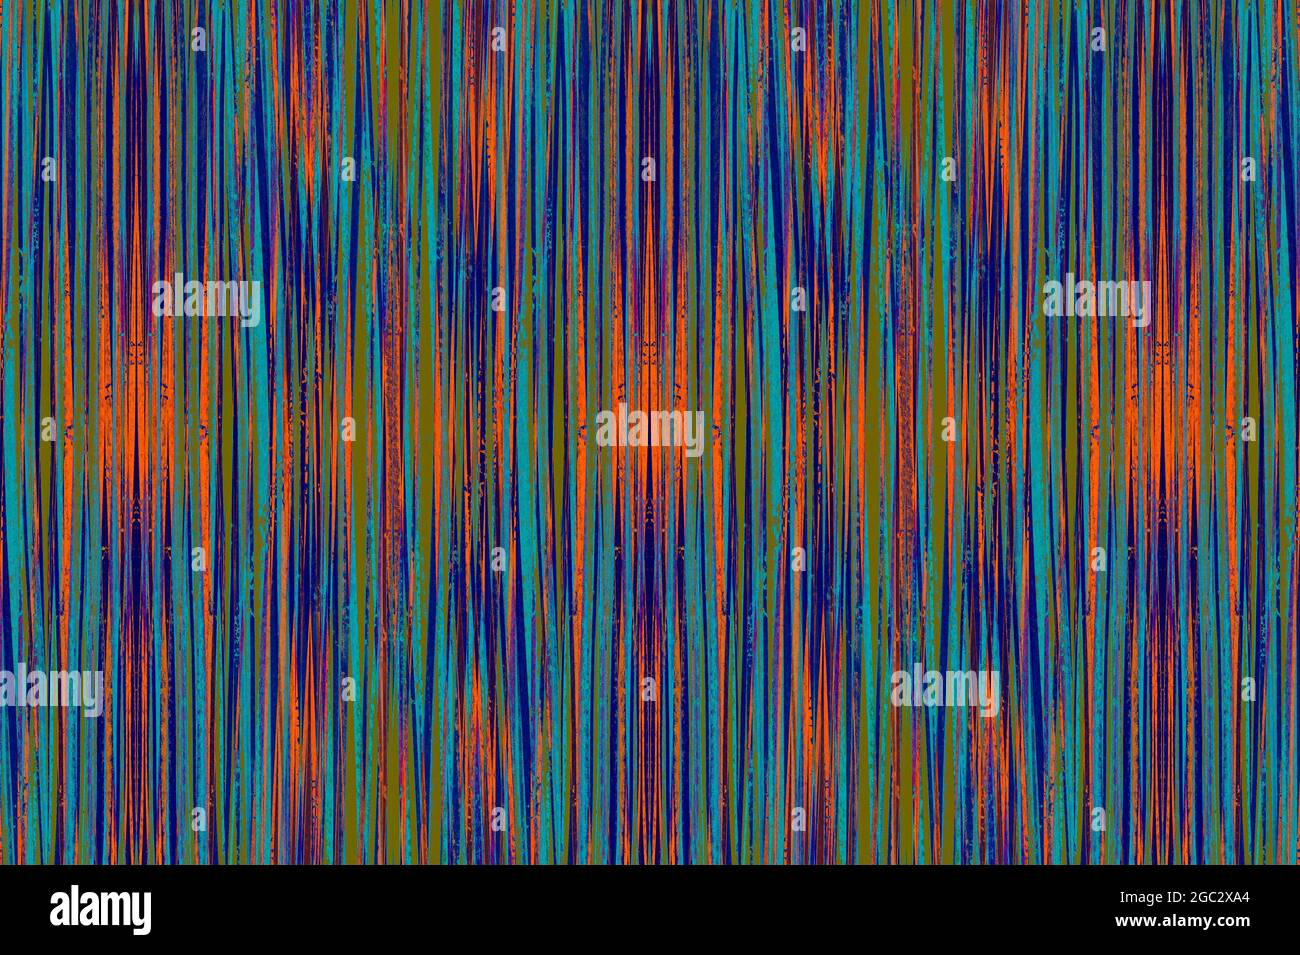 Colorful Abstract Striped Pattern Background Stock Photo